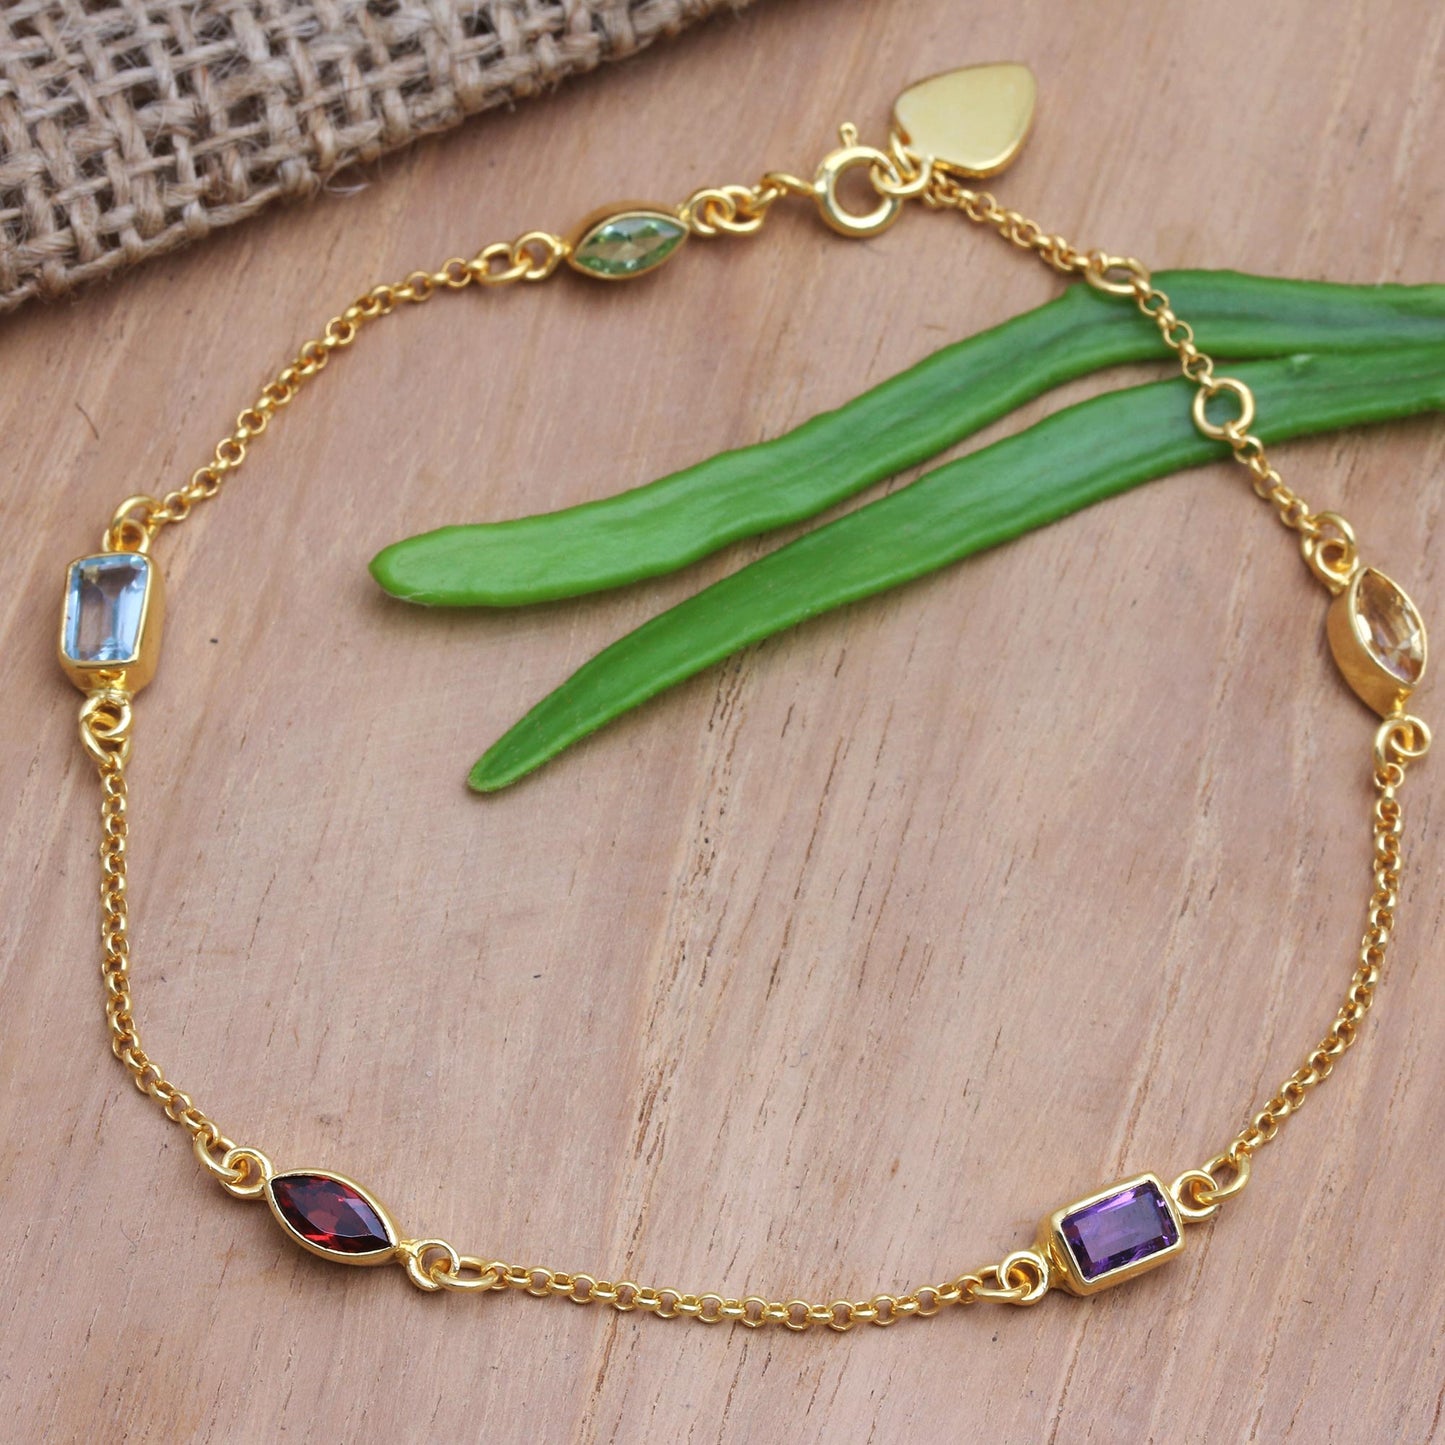 Heaven's Rainbow Gold-Plated Birthstone Station Bracelet from Bali